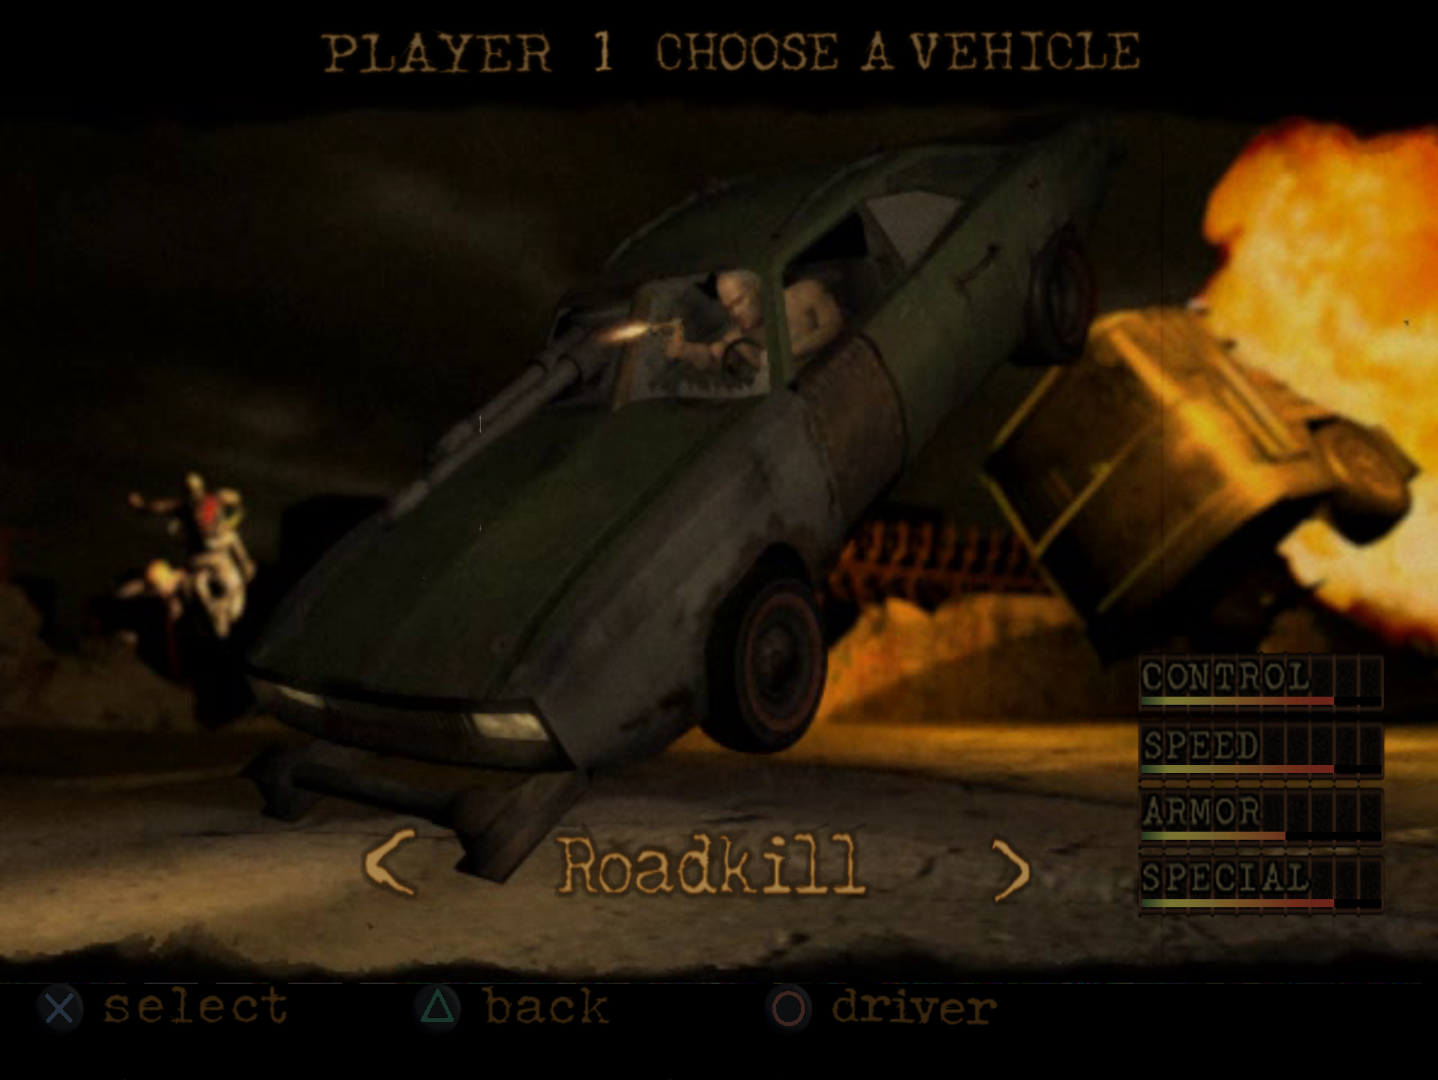 Twisted Metal 4 screenshots, images and pictures - Giant Bomb